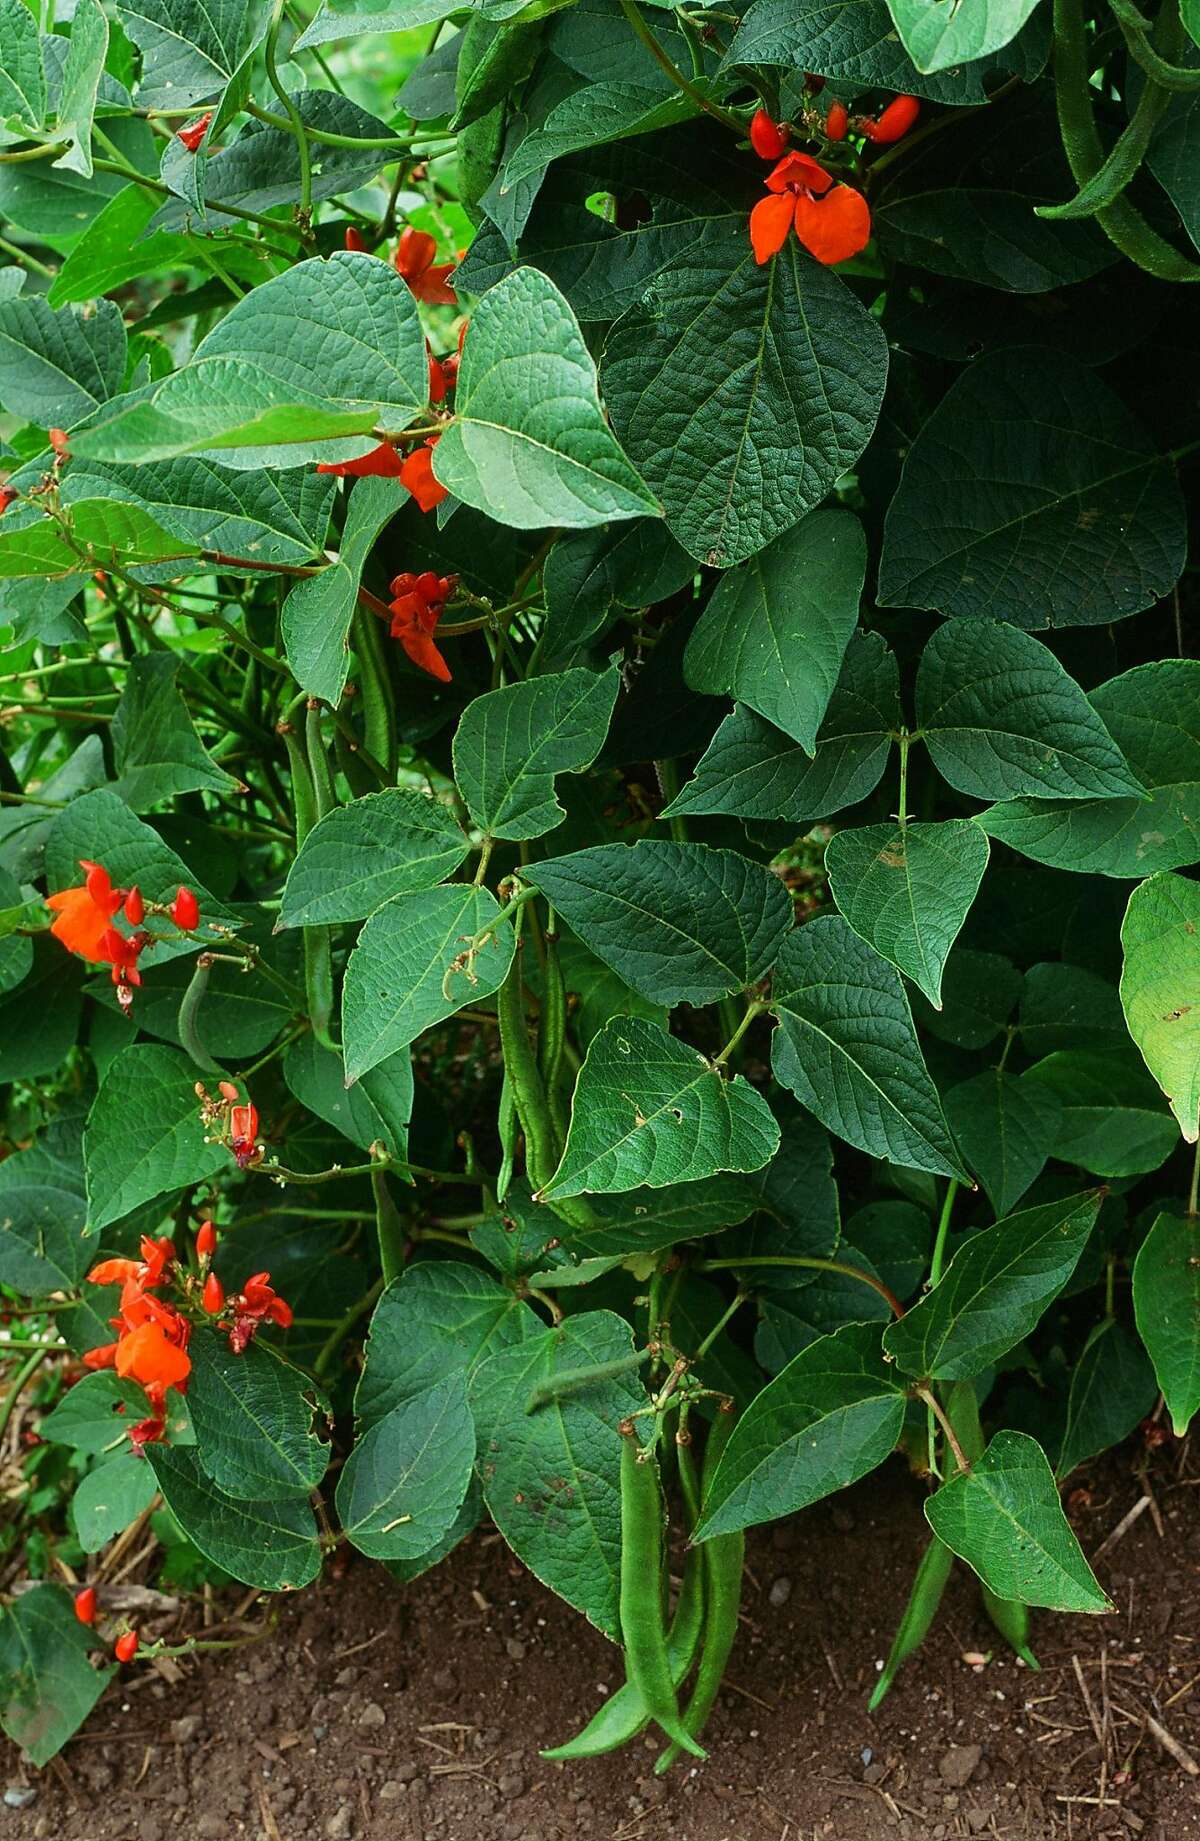 Scarlet runner bean is a South American highland species that thrives in cool summer weather. Credit: Pam Peirce